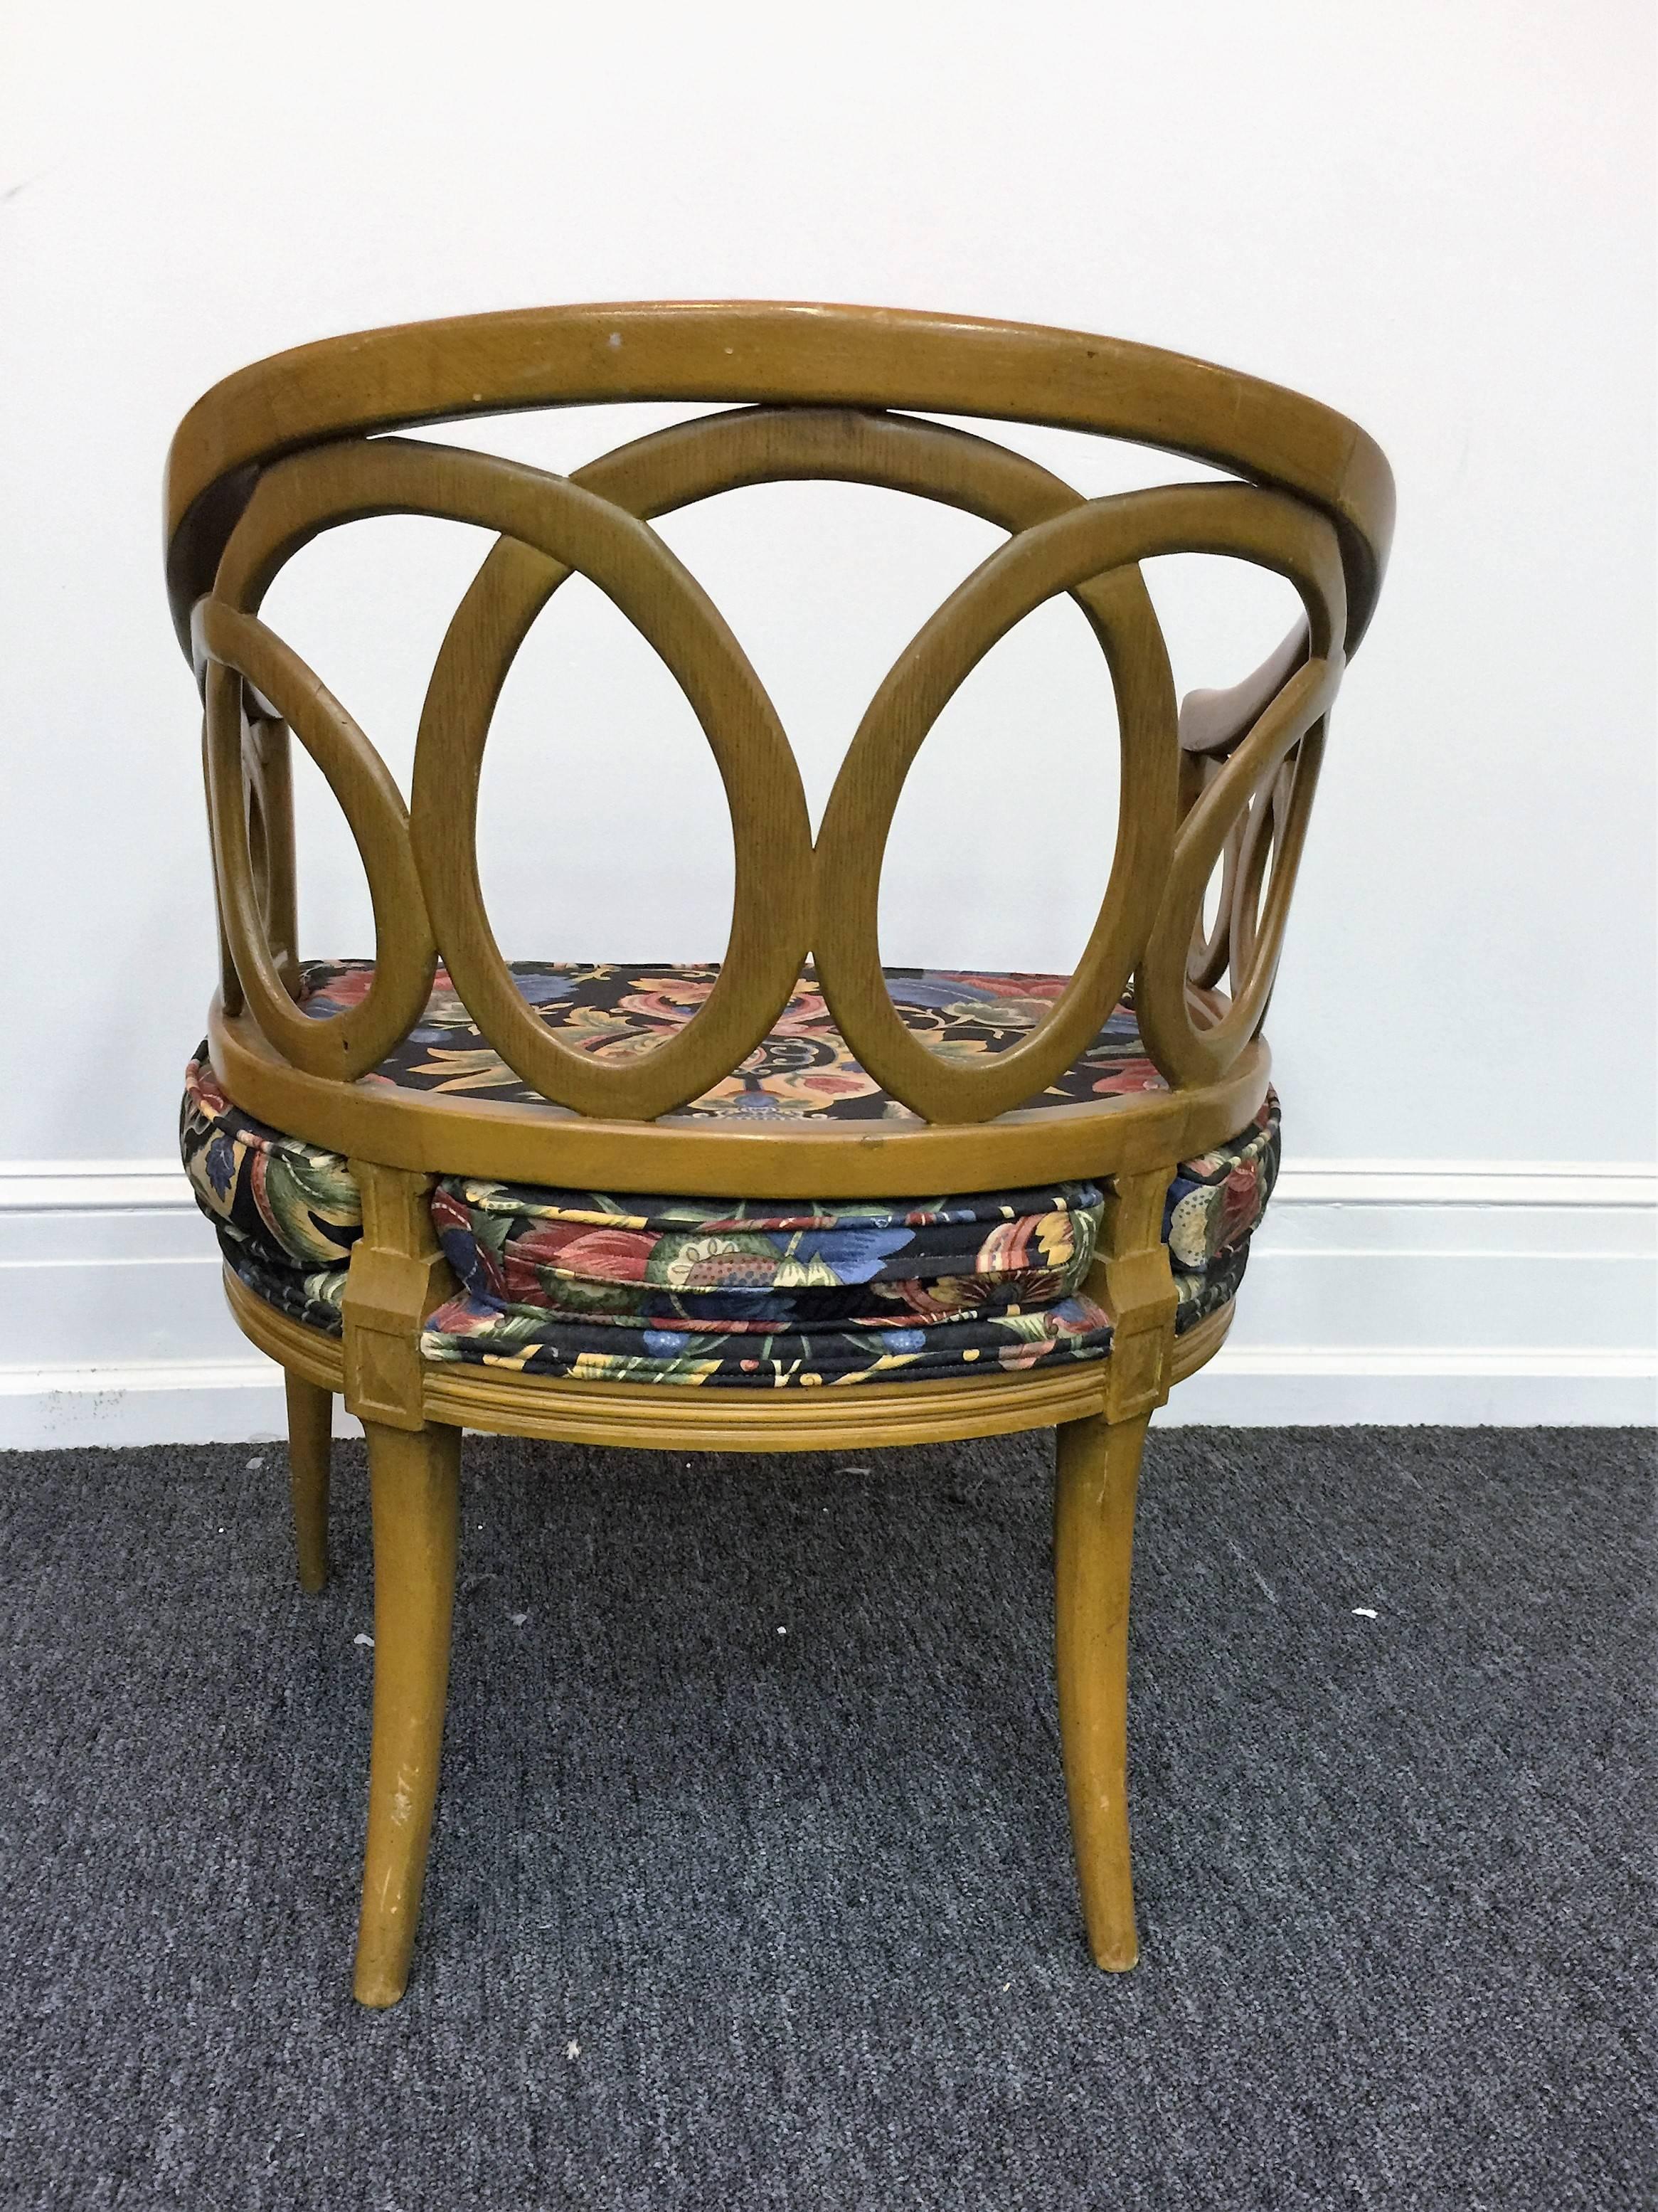 Beautiful fruitwood looped design armchairs in the style of famed British designer Frances Elkins. These Chairs are circa 1960s, perfect for many settings.